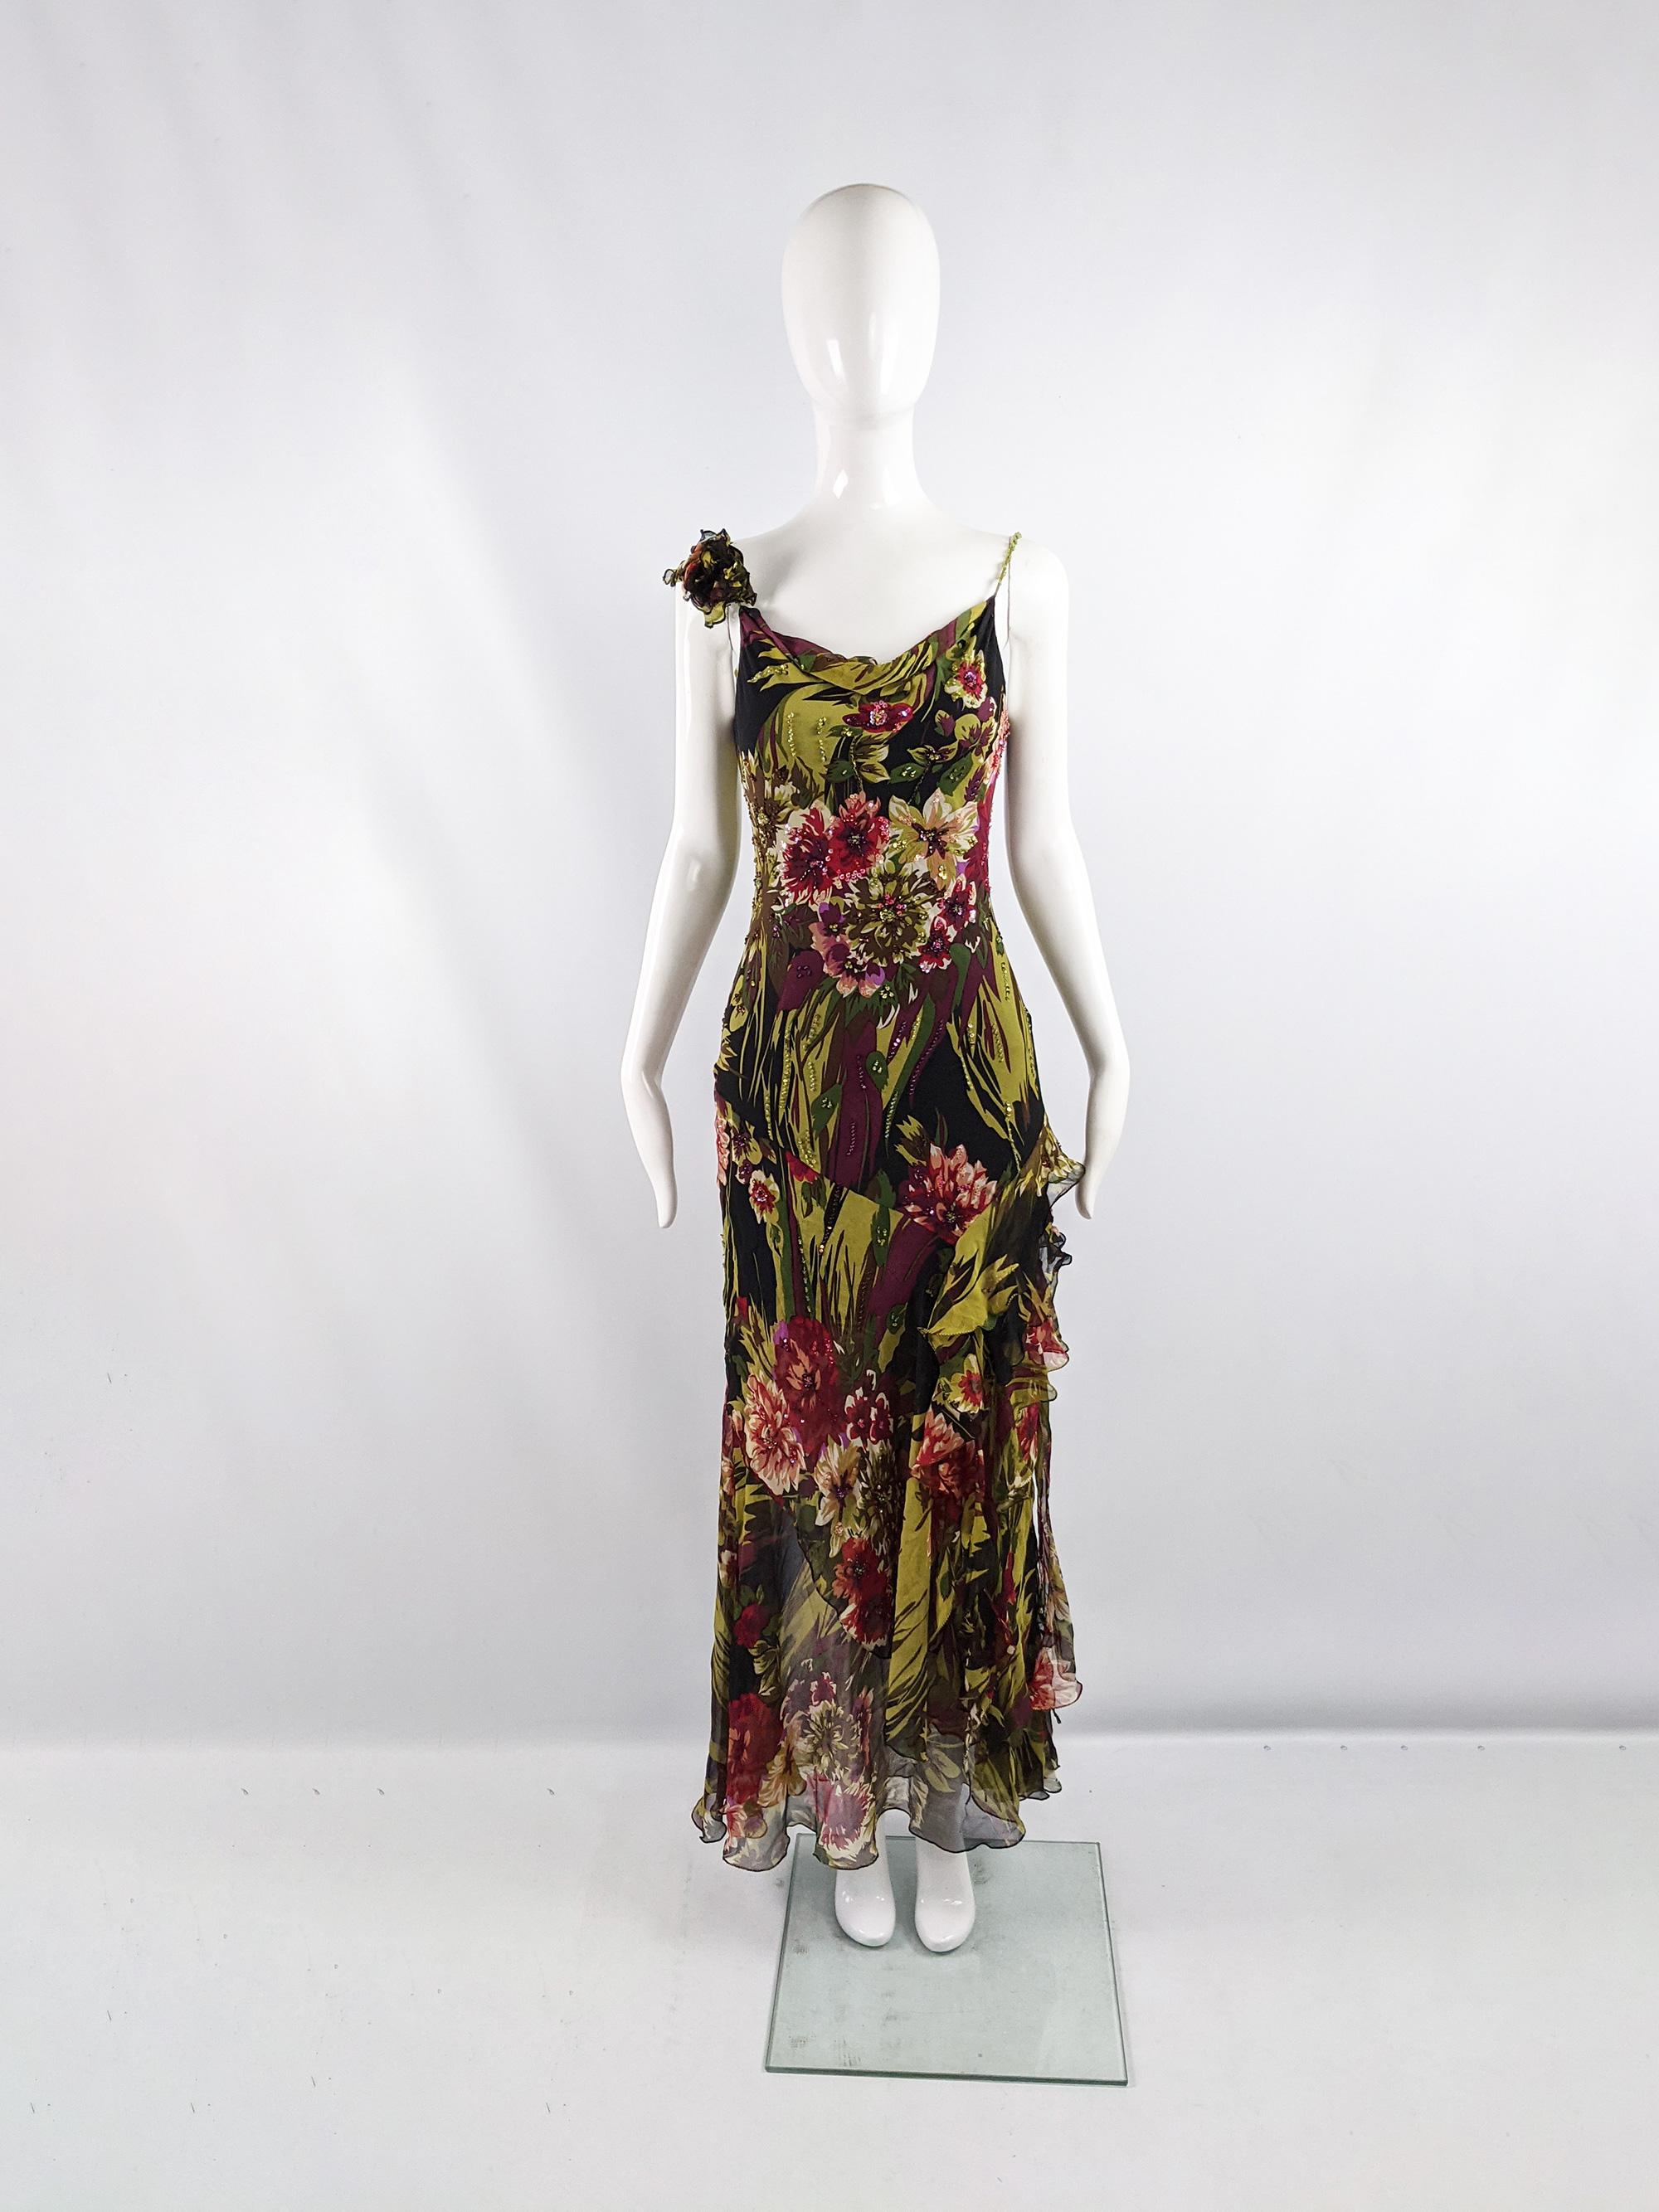 A sexy vintage womens Diane Freis maxi dress from the 90s. In a bias cut silk chiffon, hand beaded and embellished with sequins throughout the floral print. It has a strappy sleeveless design with attached flower detail on one strap, a matching